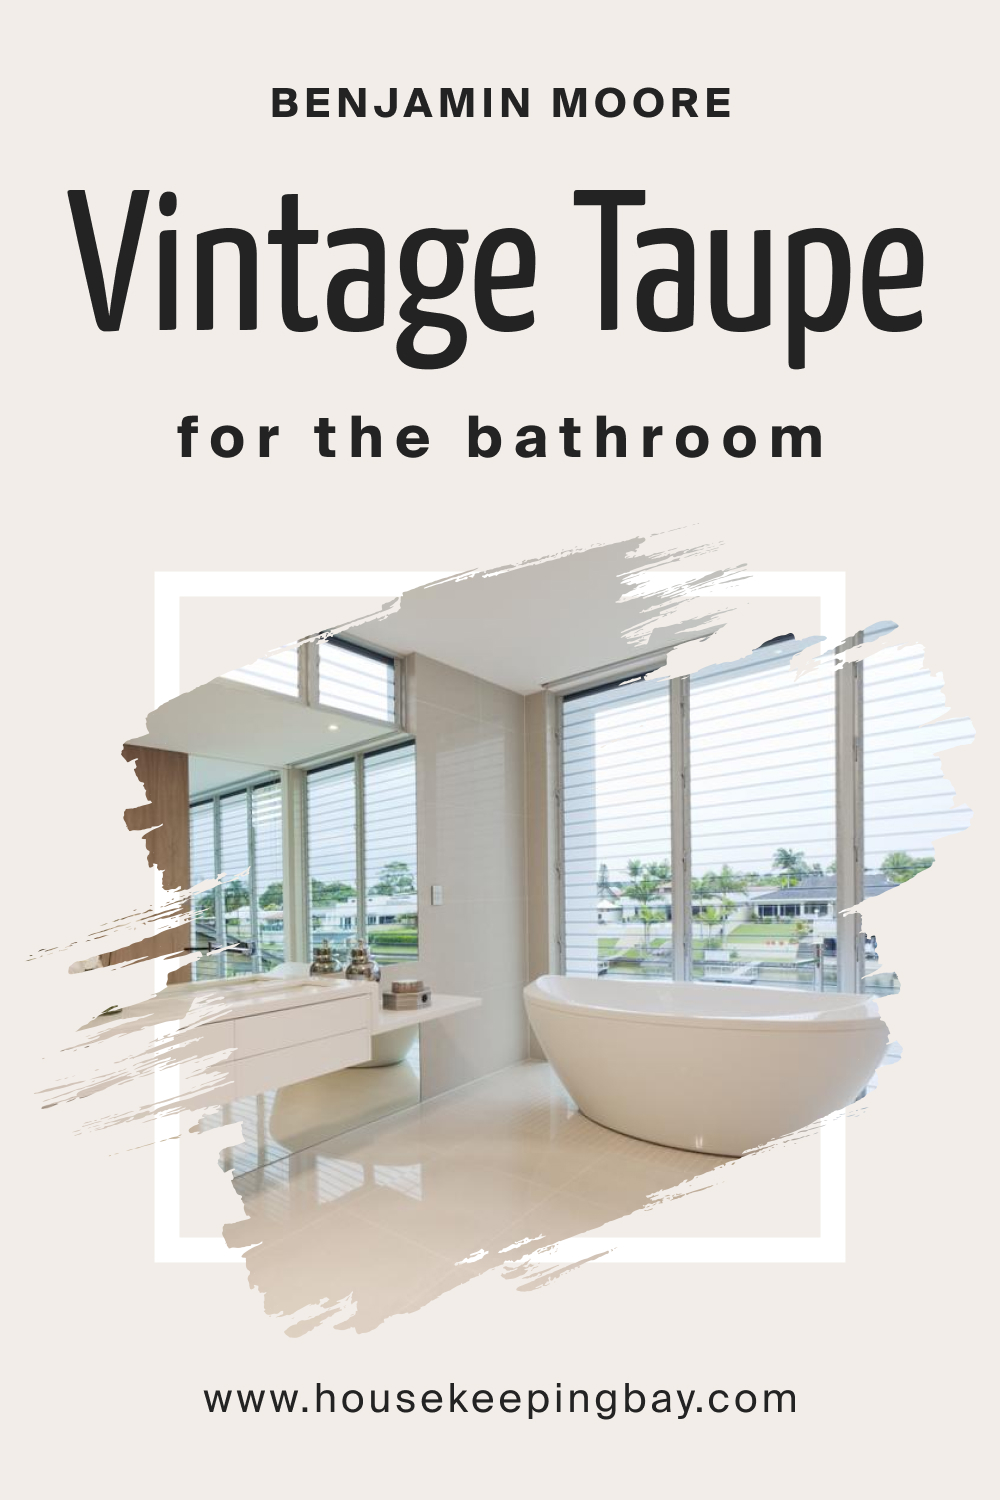 Benjamin Moore. Vintage Taupe 2110 70 for the Bathroom